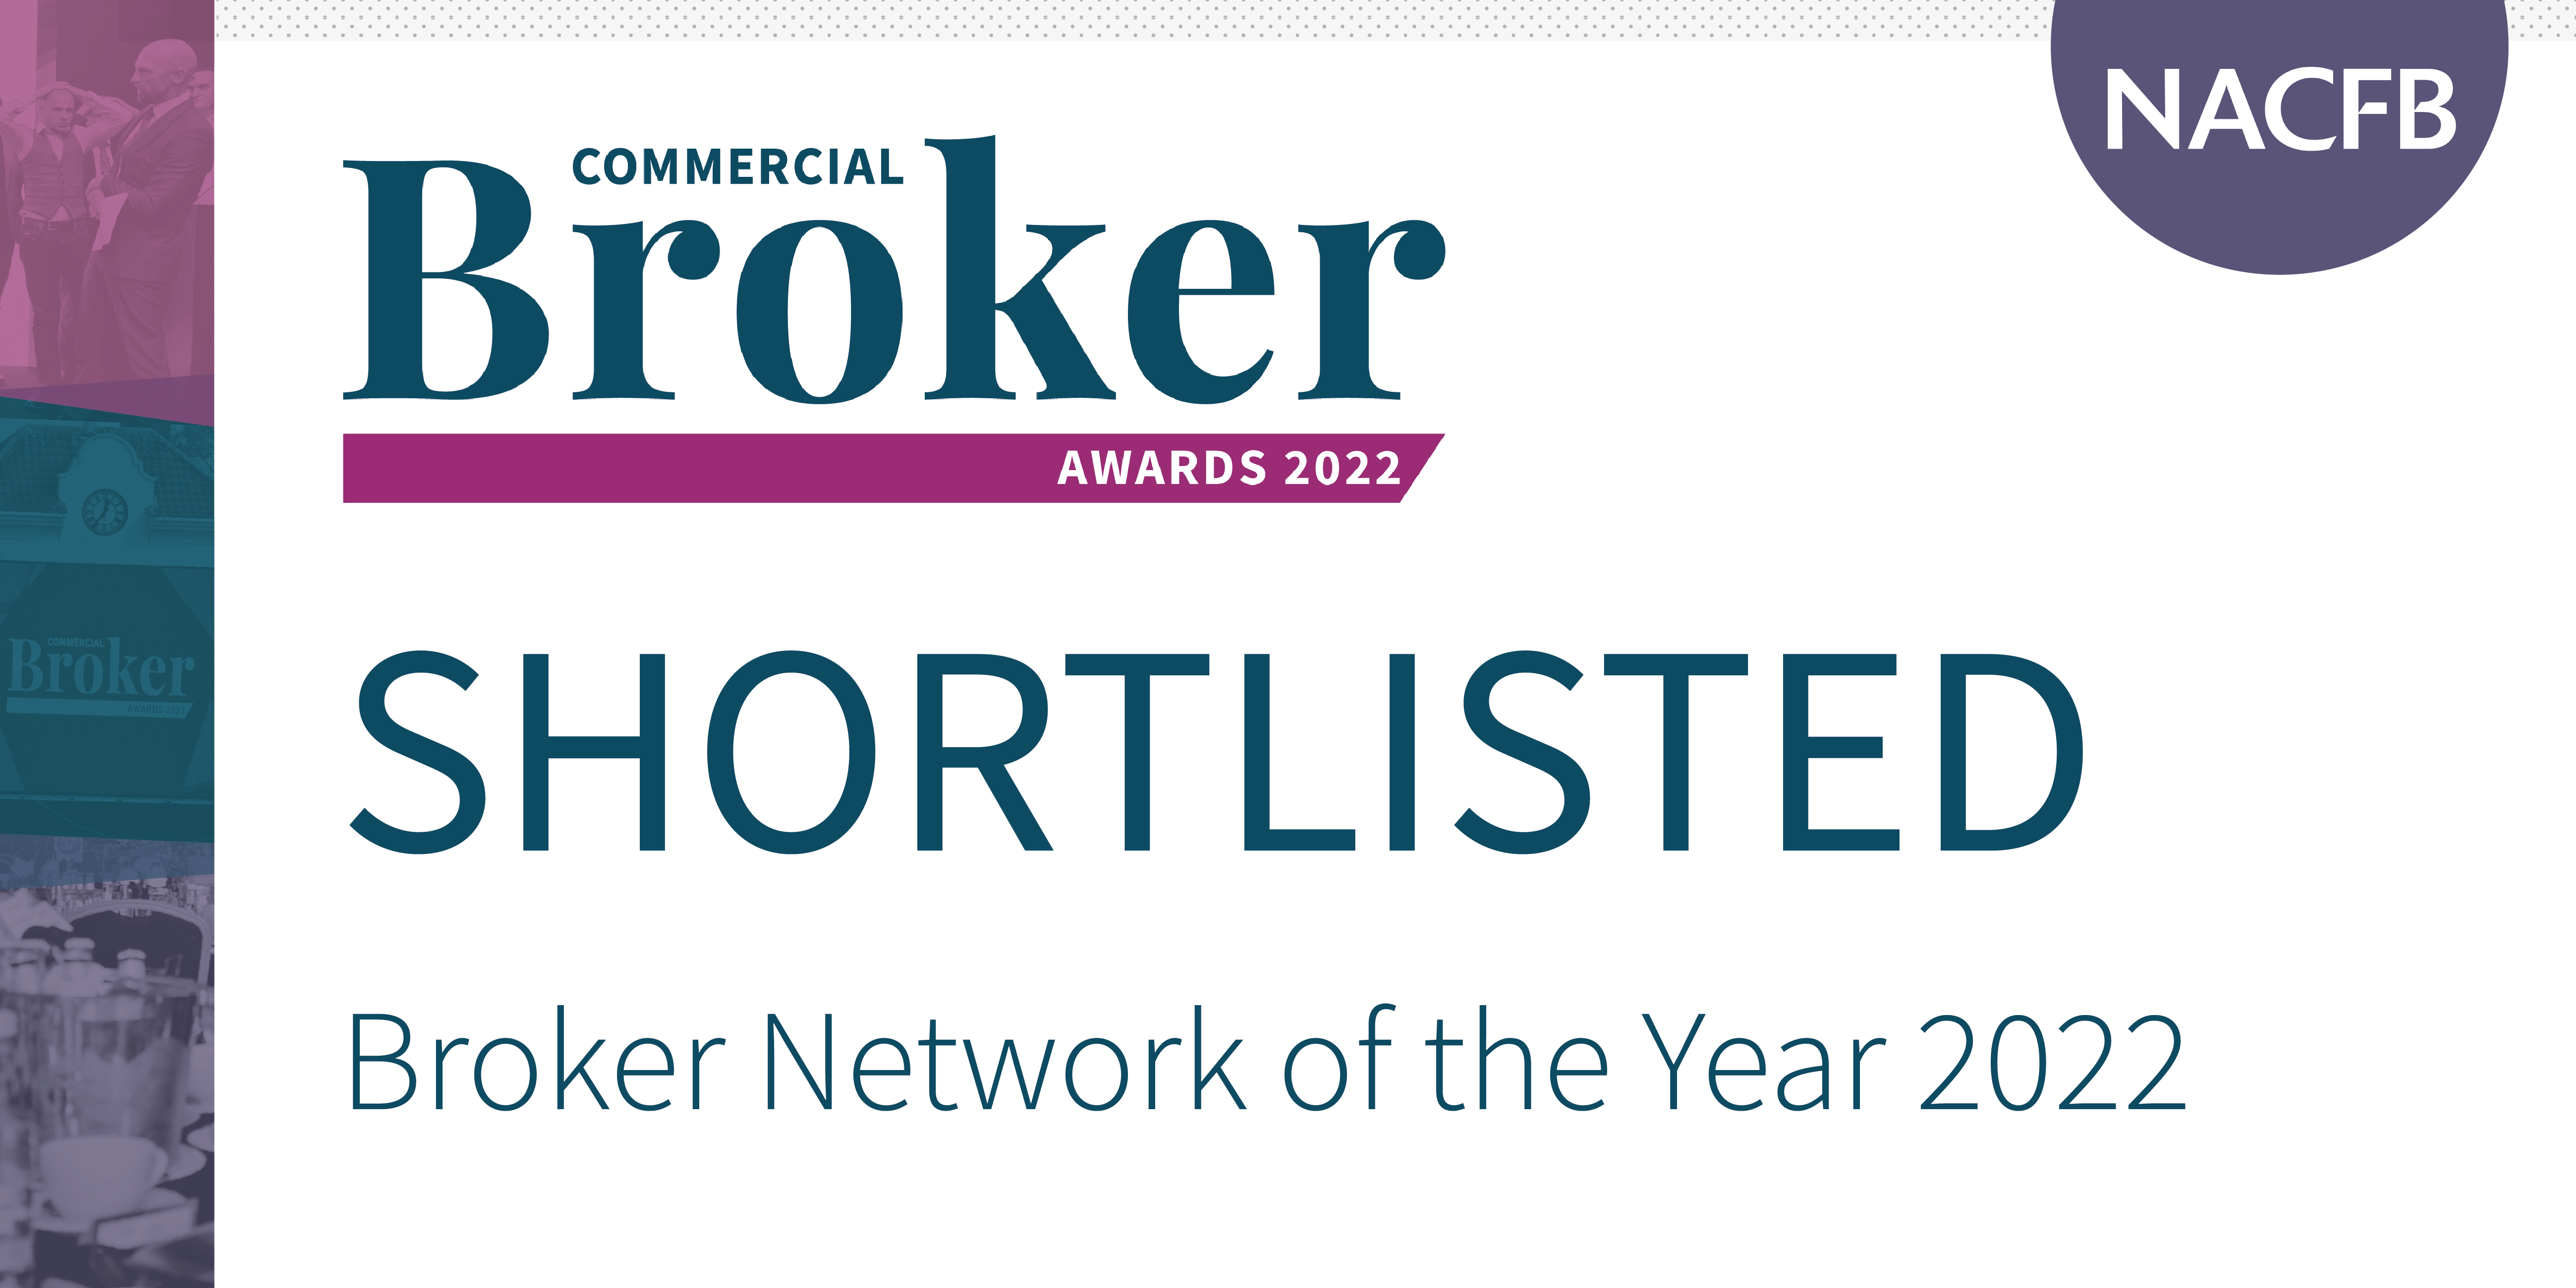 Shortlisted - Broker Network of the Year 2022